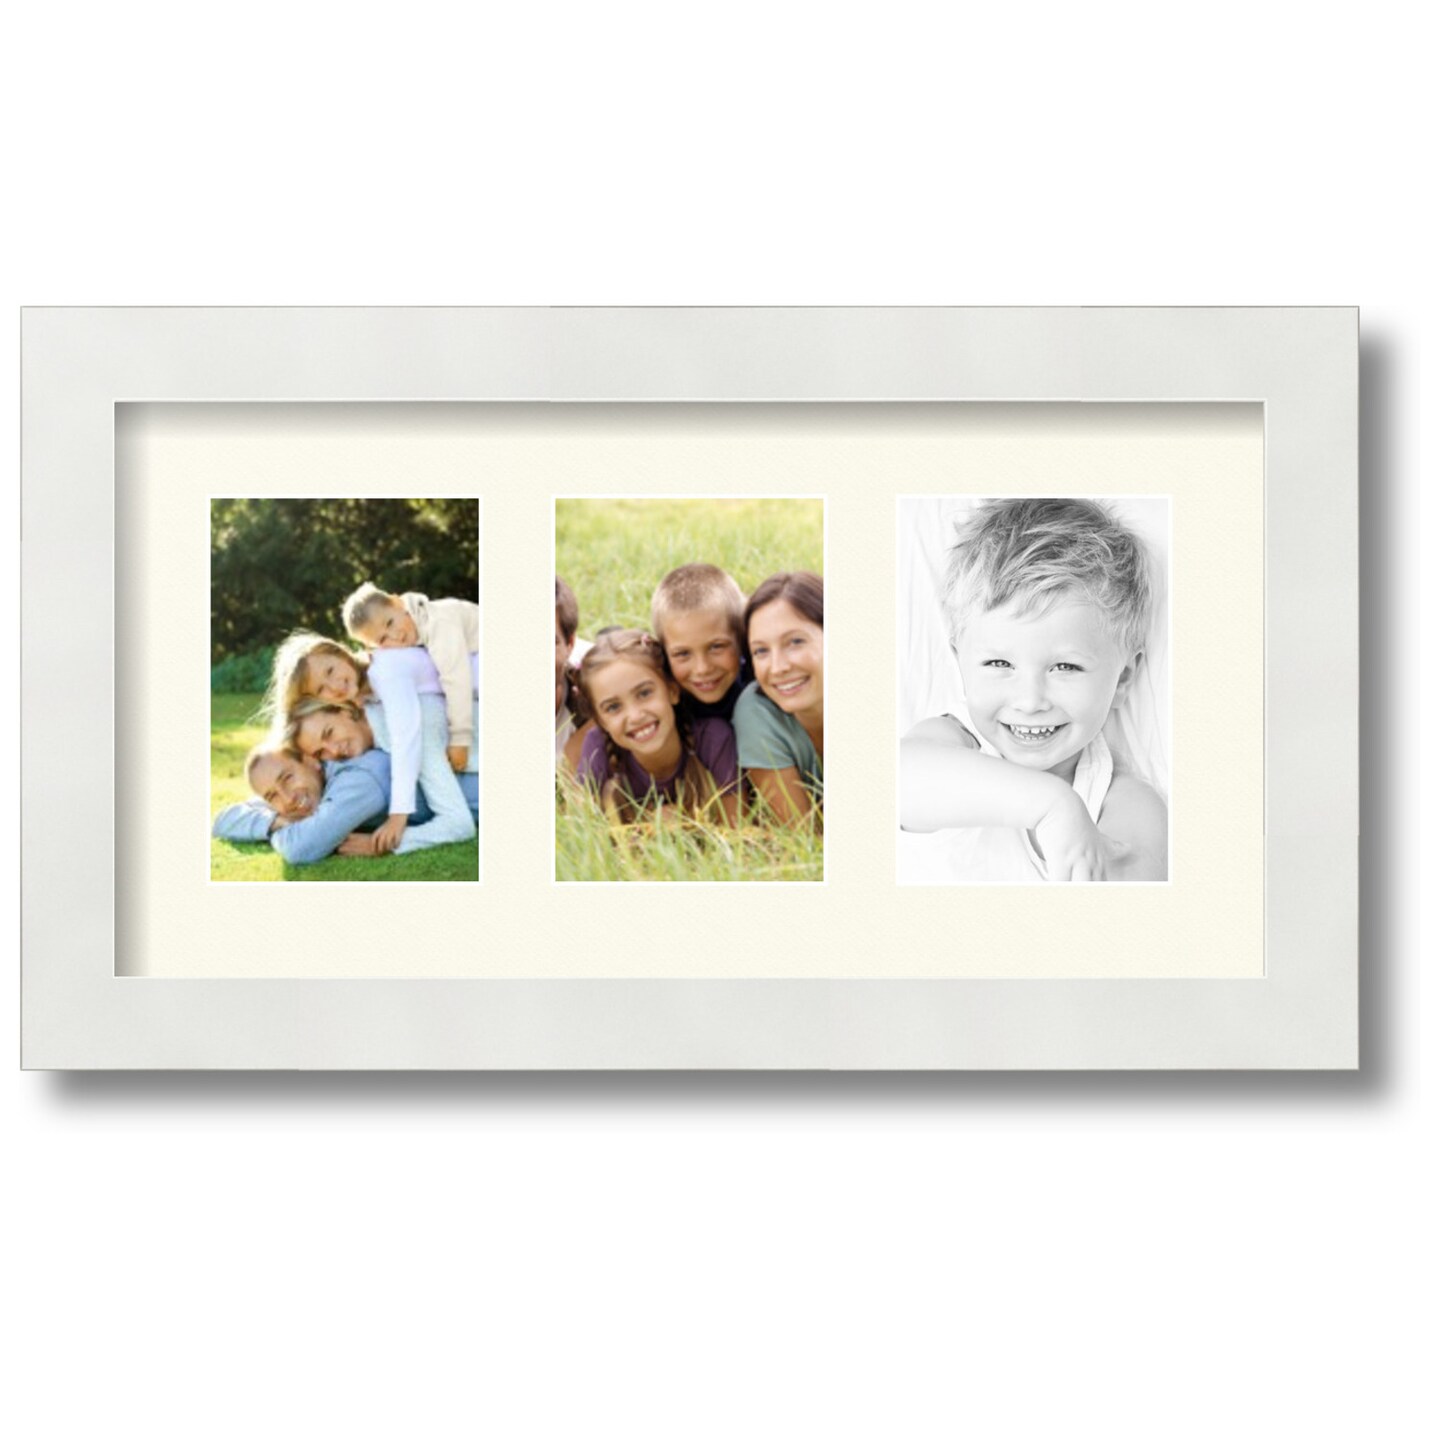 Langdon House 11x14 Almond White Picture Frame w/ Mat for 8x10 Photo,  Contemporary Style, 1 Pack, Richland Collection (US Company) 